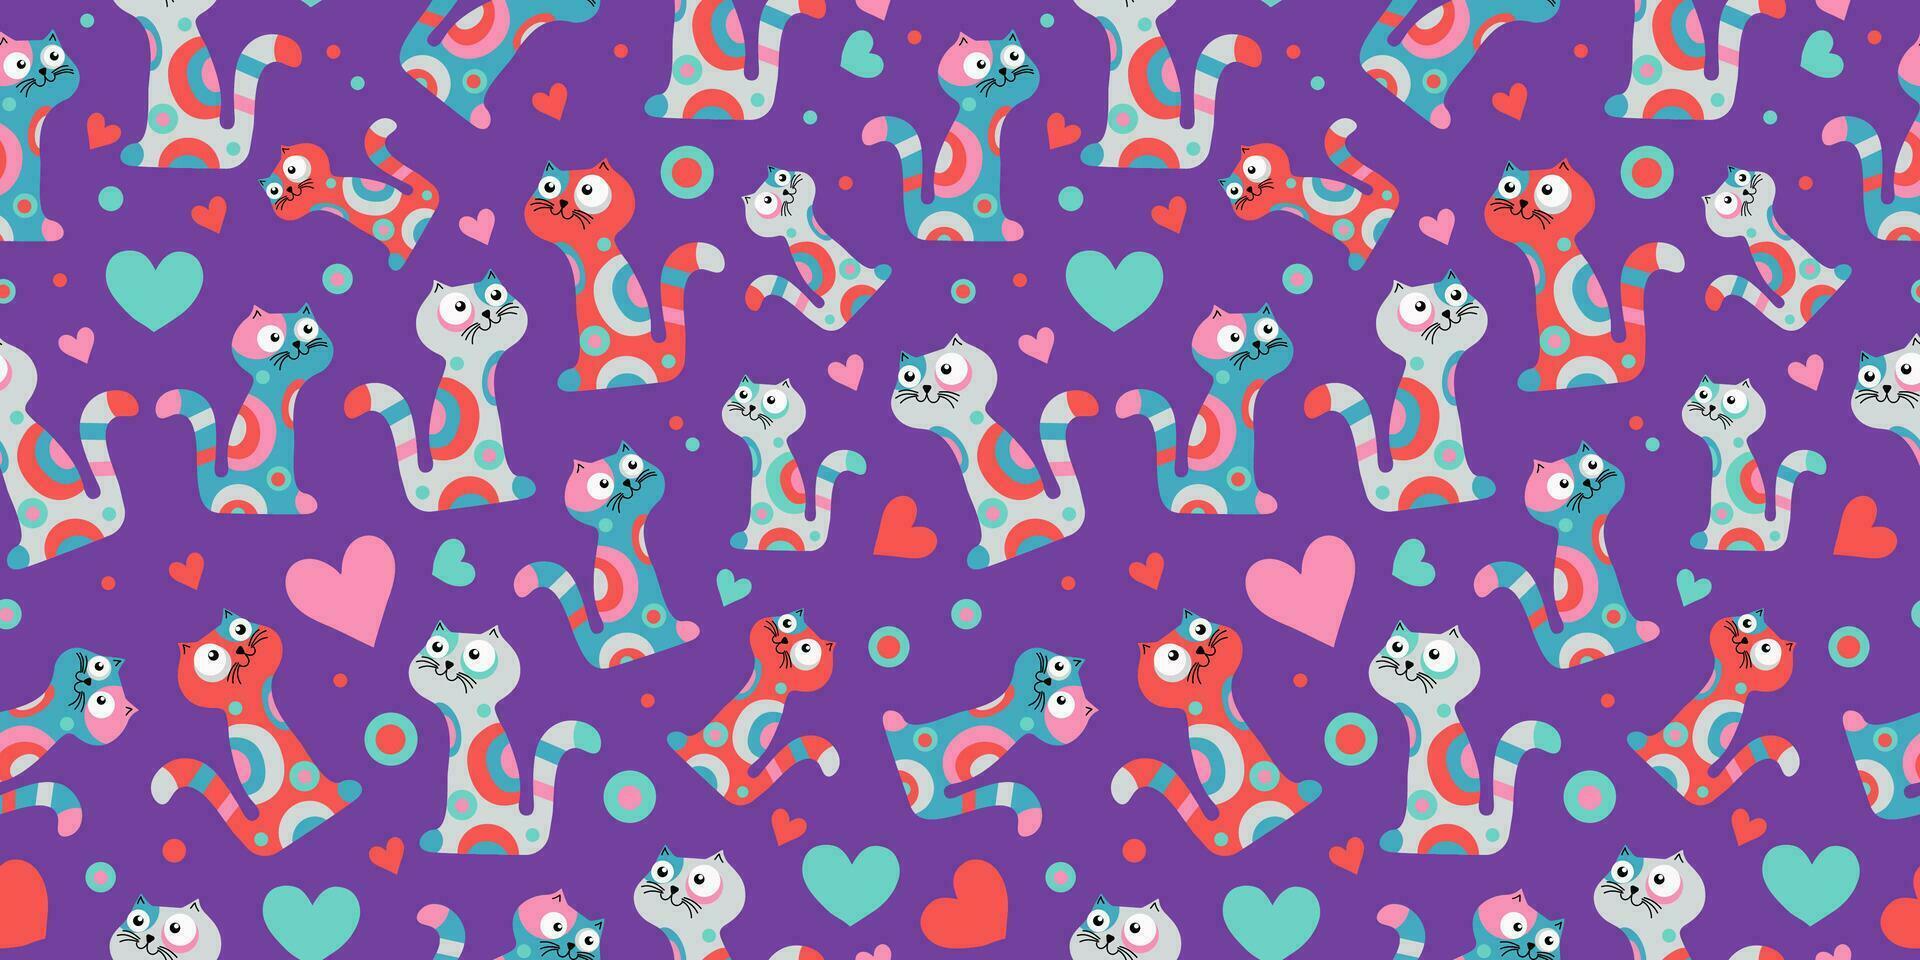 Pattern Bright multi-colored cartoon cats with hearts, cats in love. St. Valentine's Day. Seamless vector background. Wallpaper, decor.